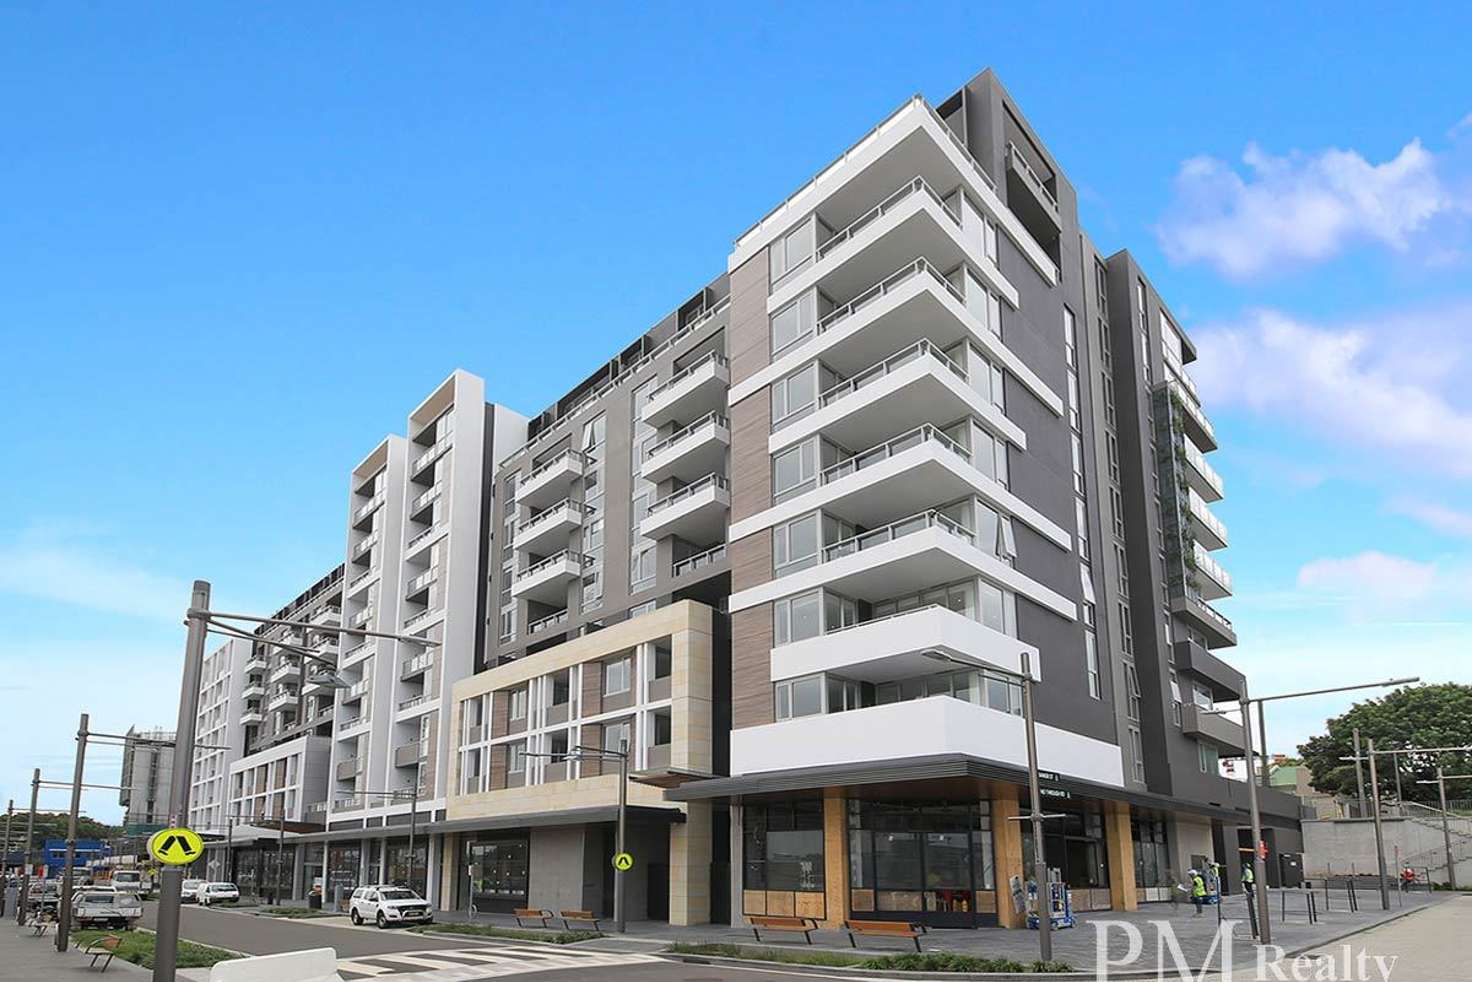 Main view of Homely apartment listing, 406/18 Ebsworth St, Zetland NSW 2017